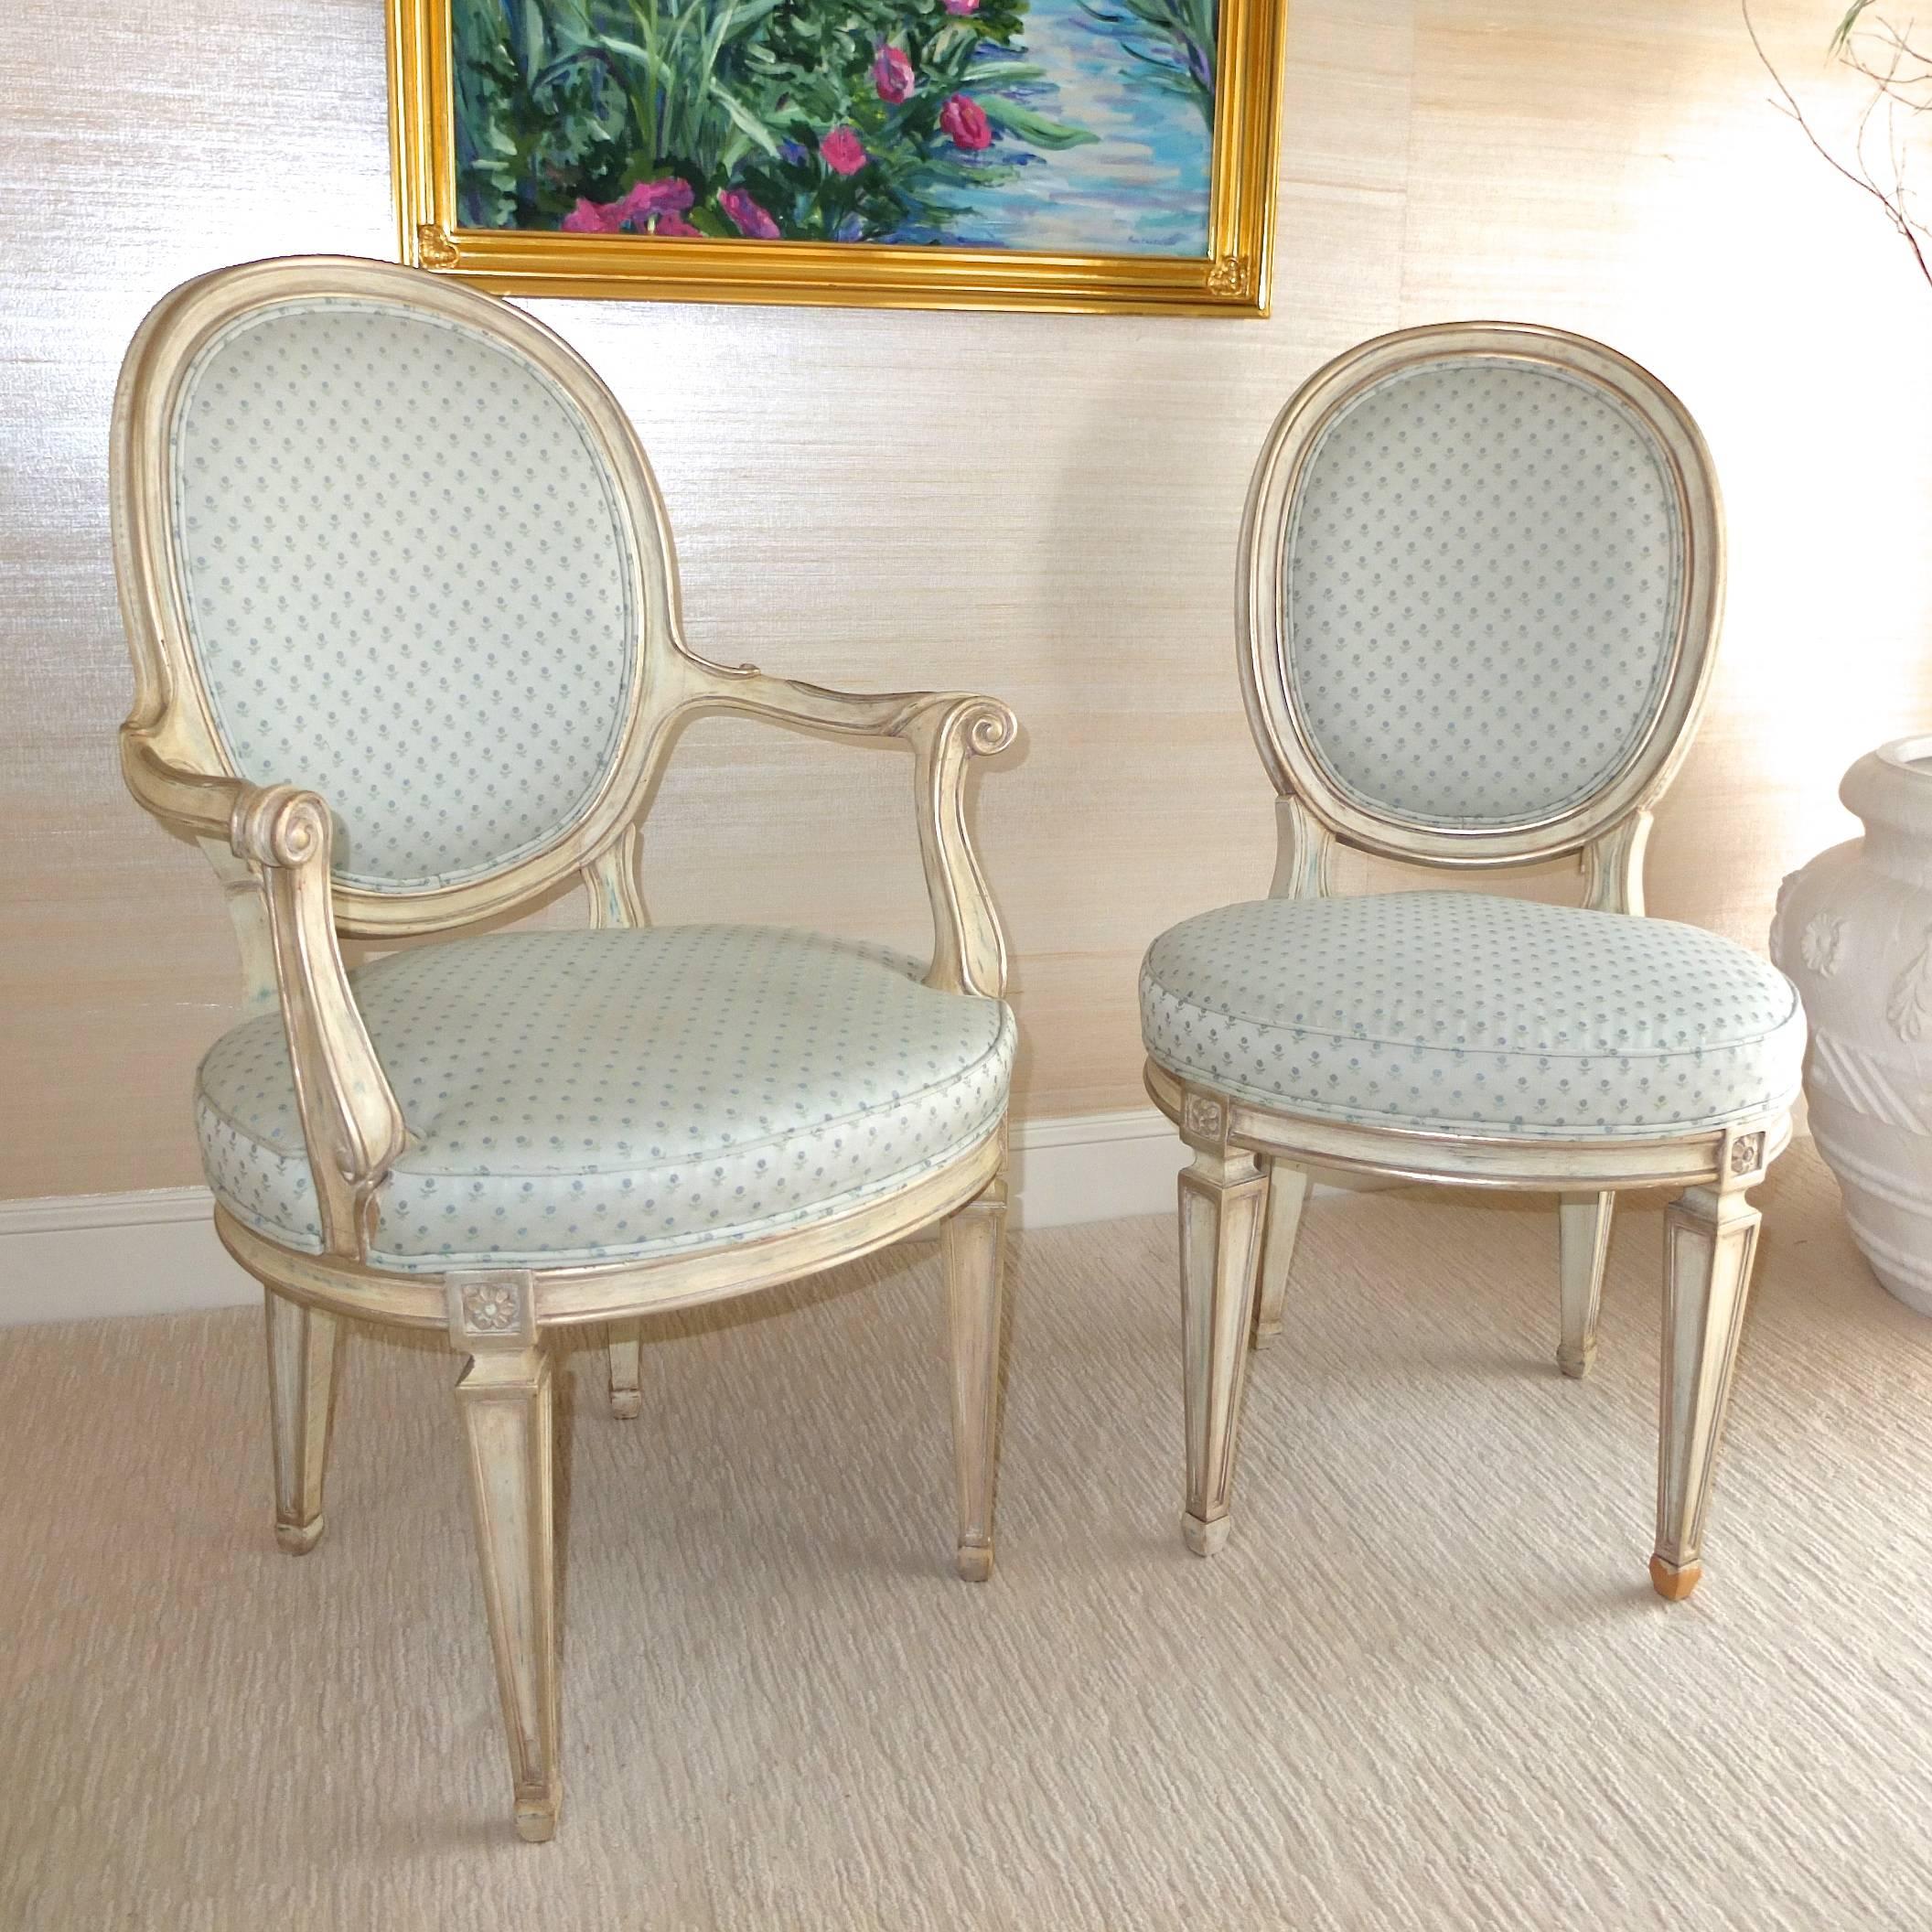 Set of Louis XV Style Oval Back Chairs In Good Condition For Sale In Hanover, MA